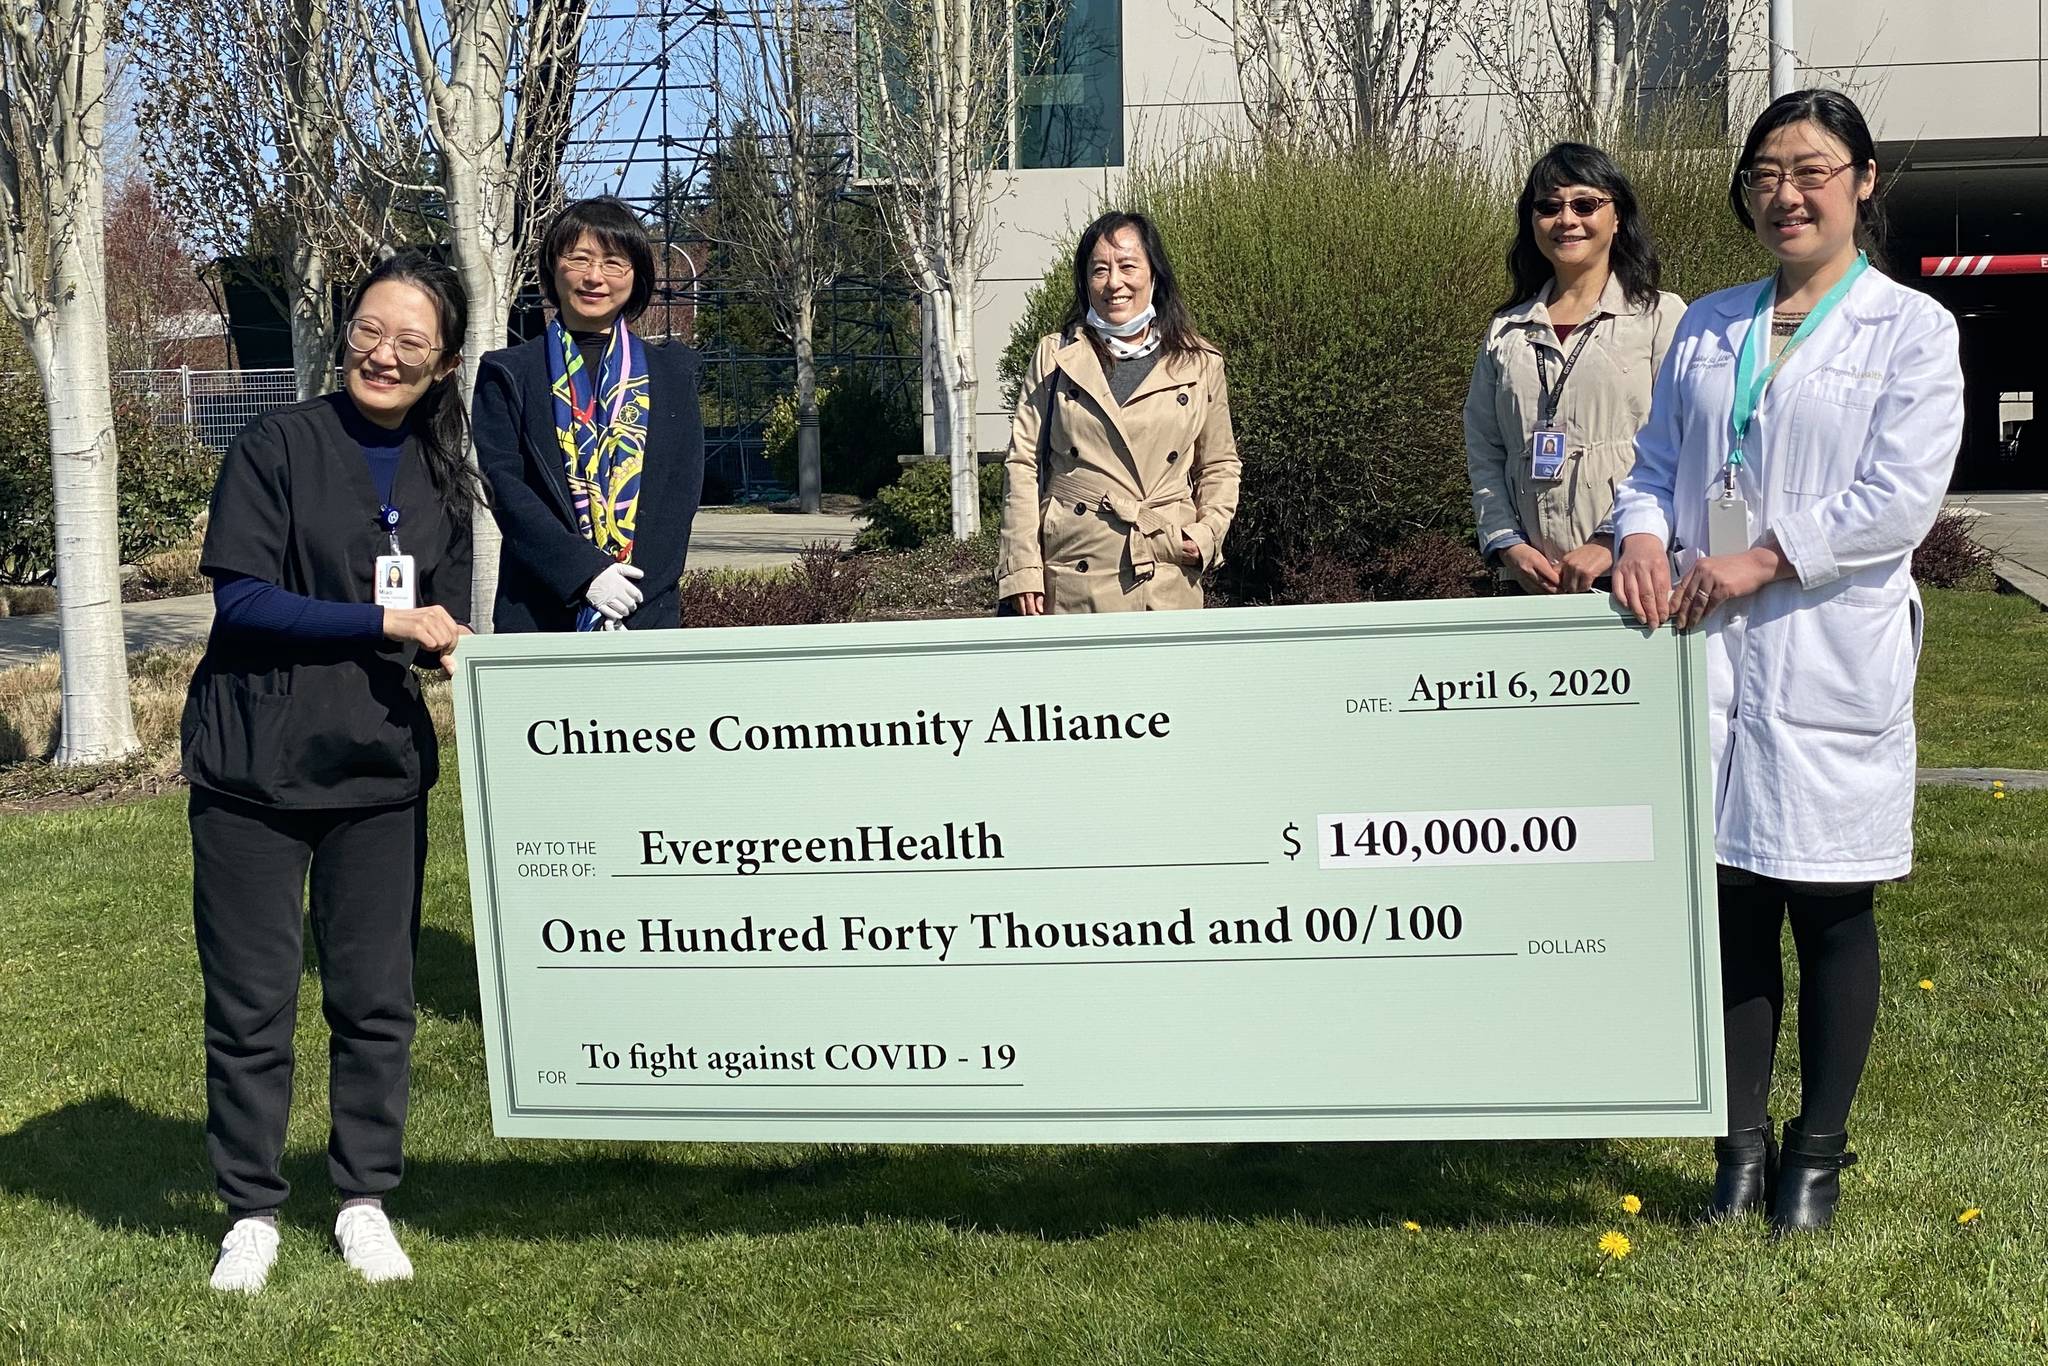 Chinese Community Alliance donates to EvergreenHealth Foundation to support COVID-19 efforts